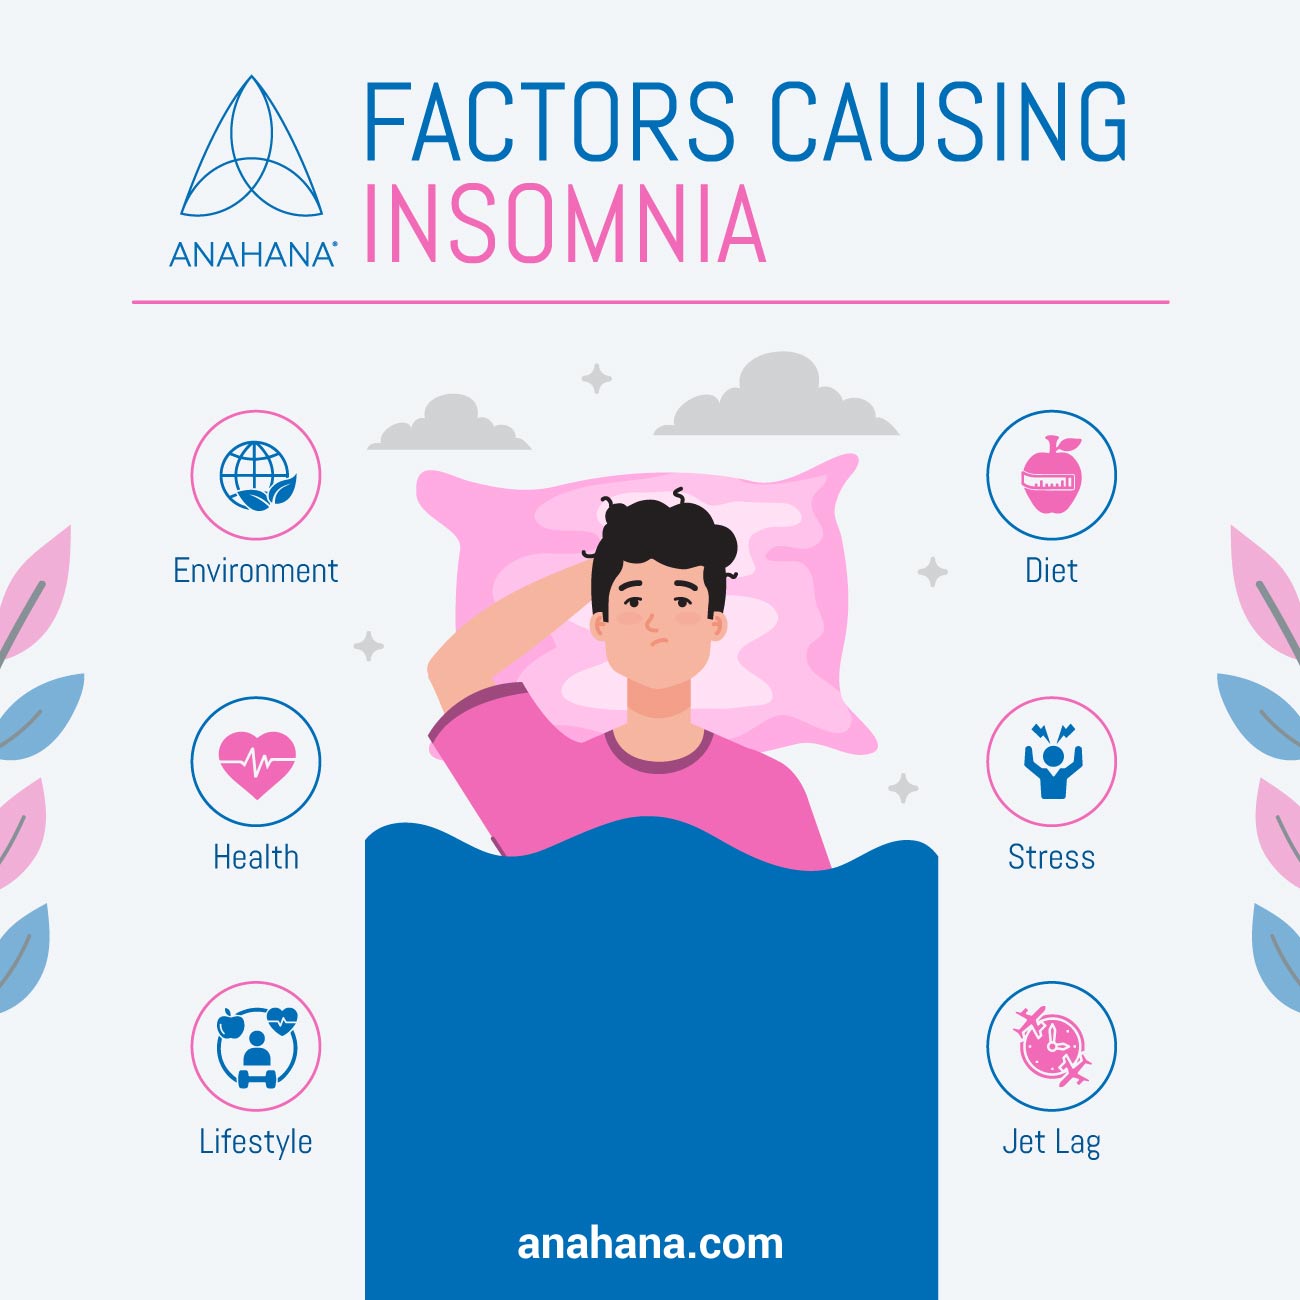 factors that could cause insomnia